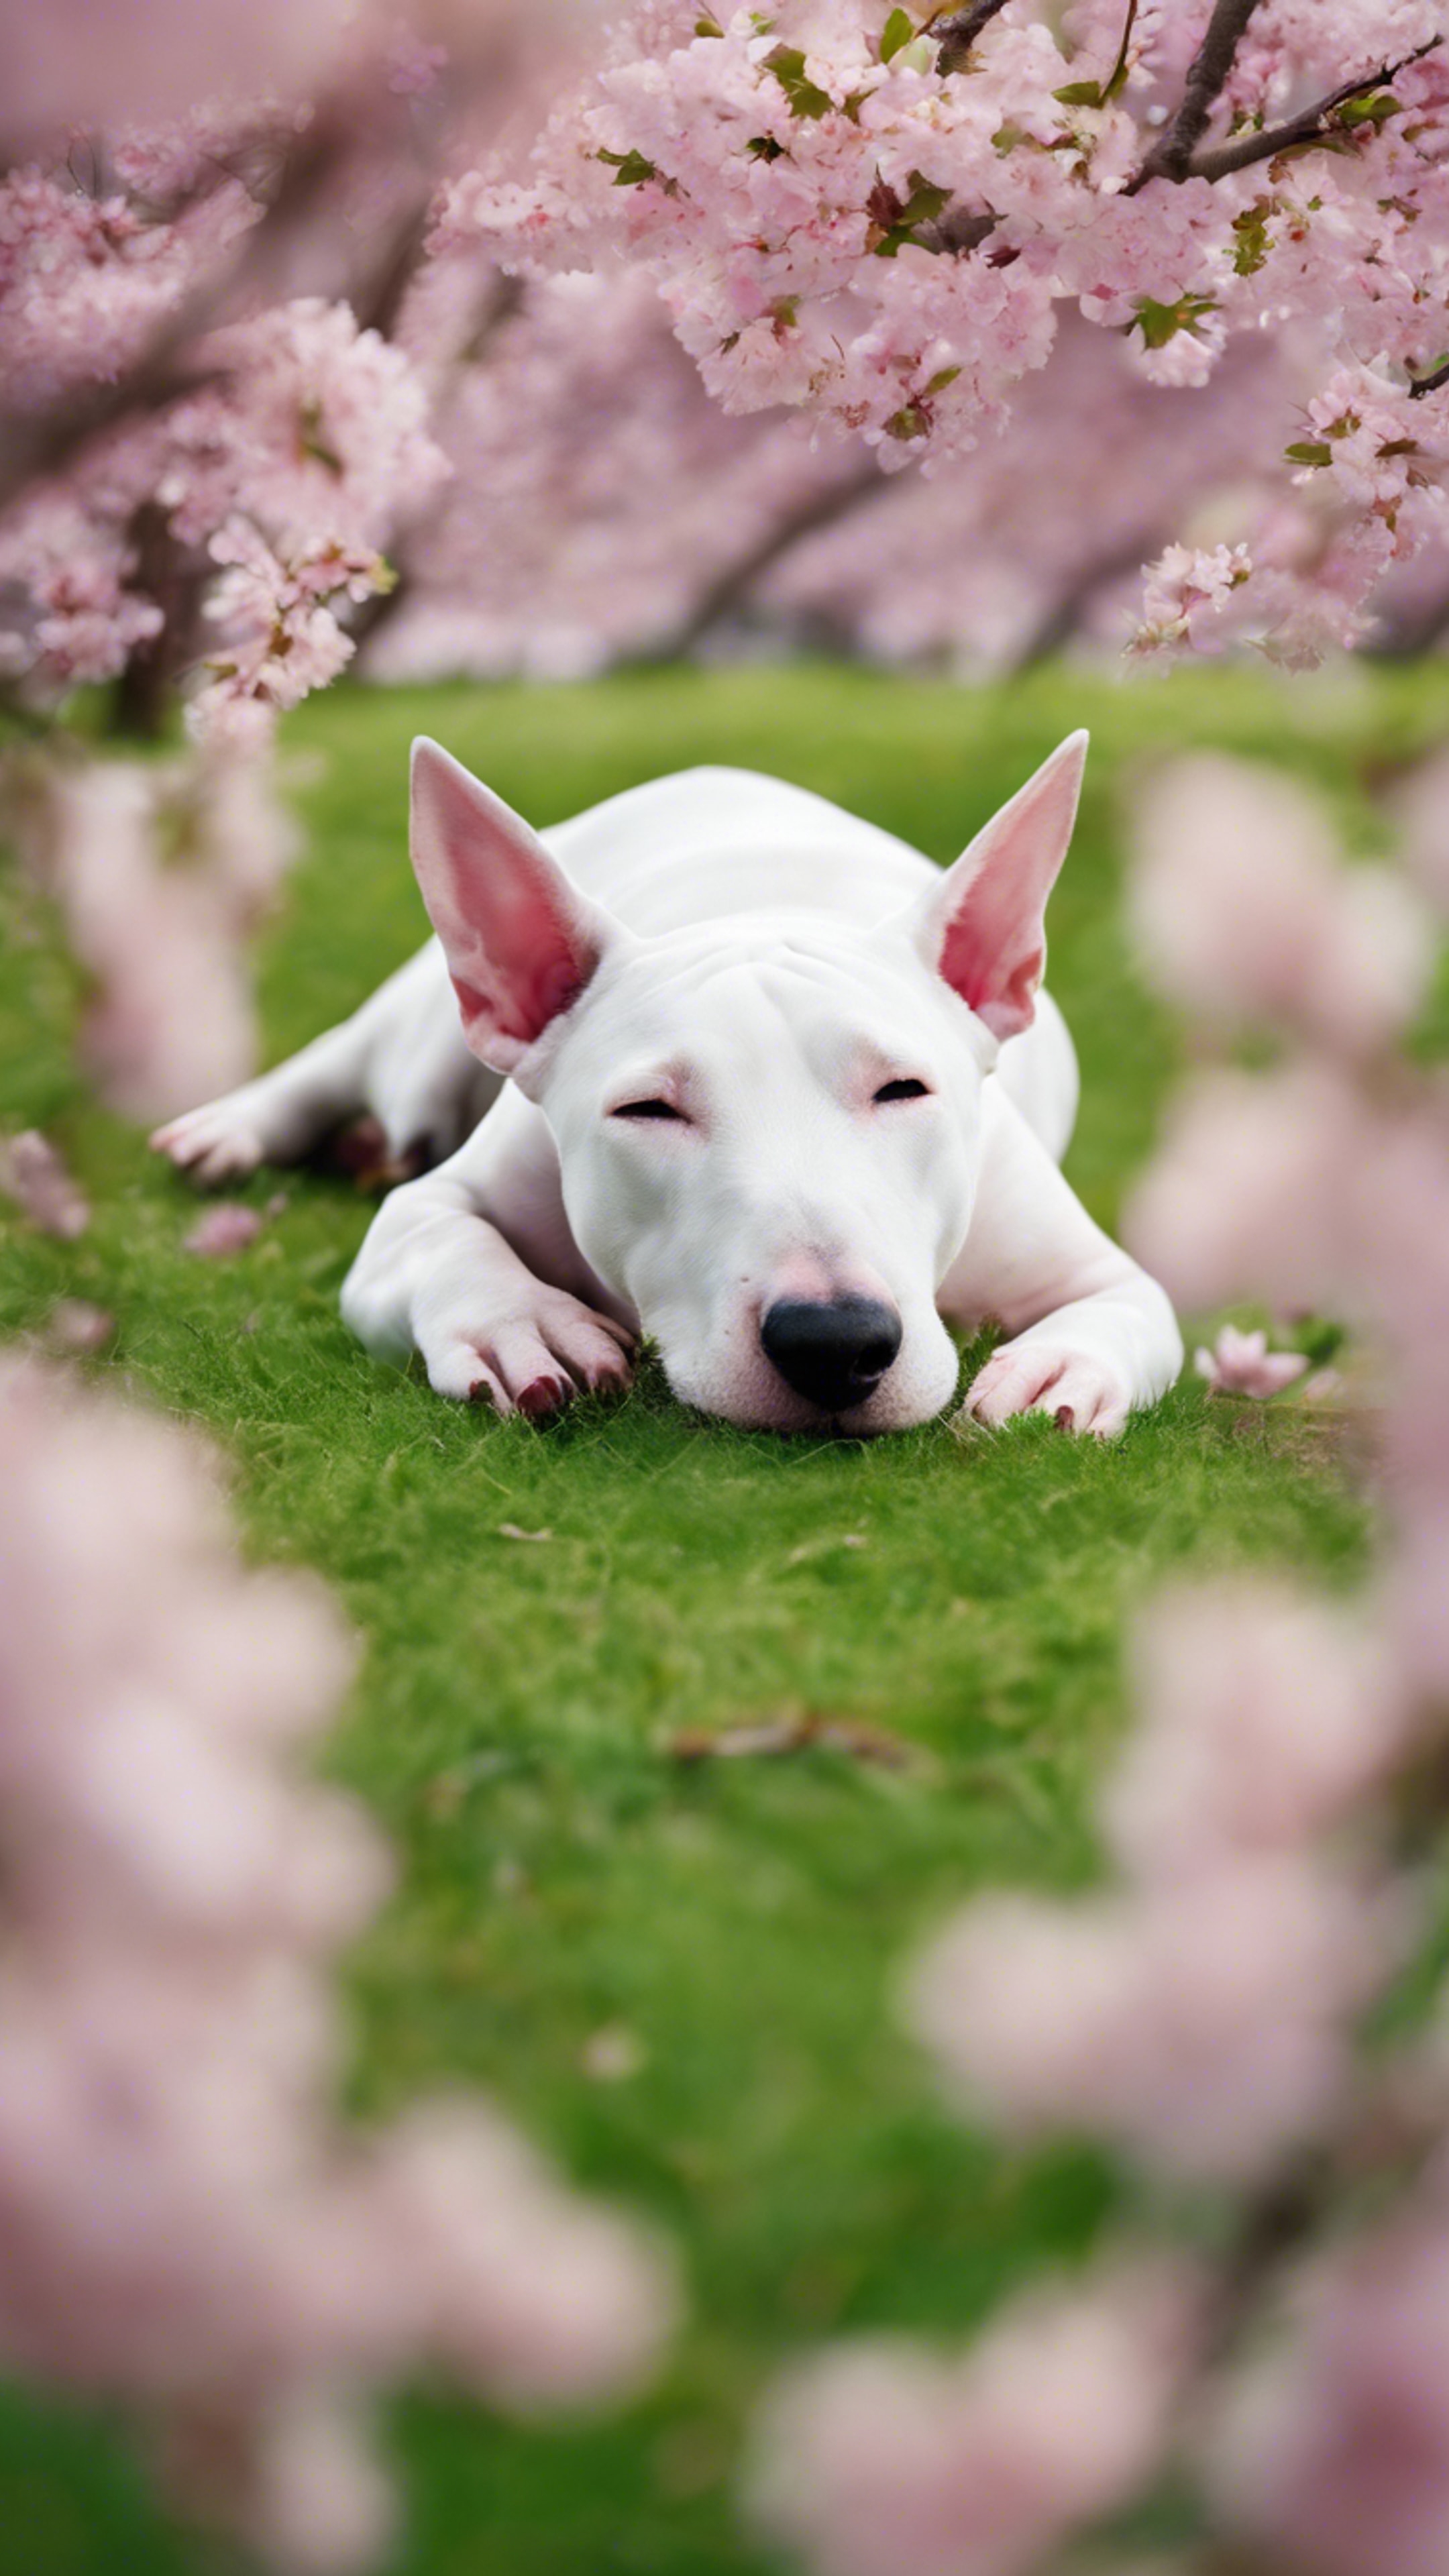 A Bull Terrier curled into a ball, sleeping in a bright green city park at the base of a cherry blossom tree. Tapéta[3df408a3b3f7480298db]